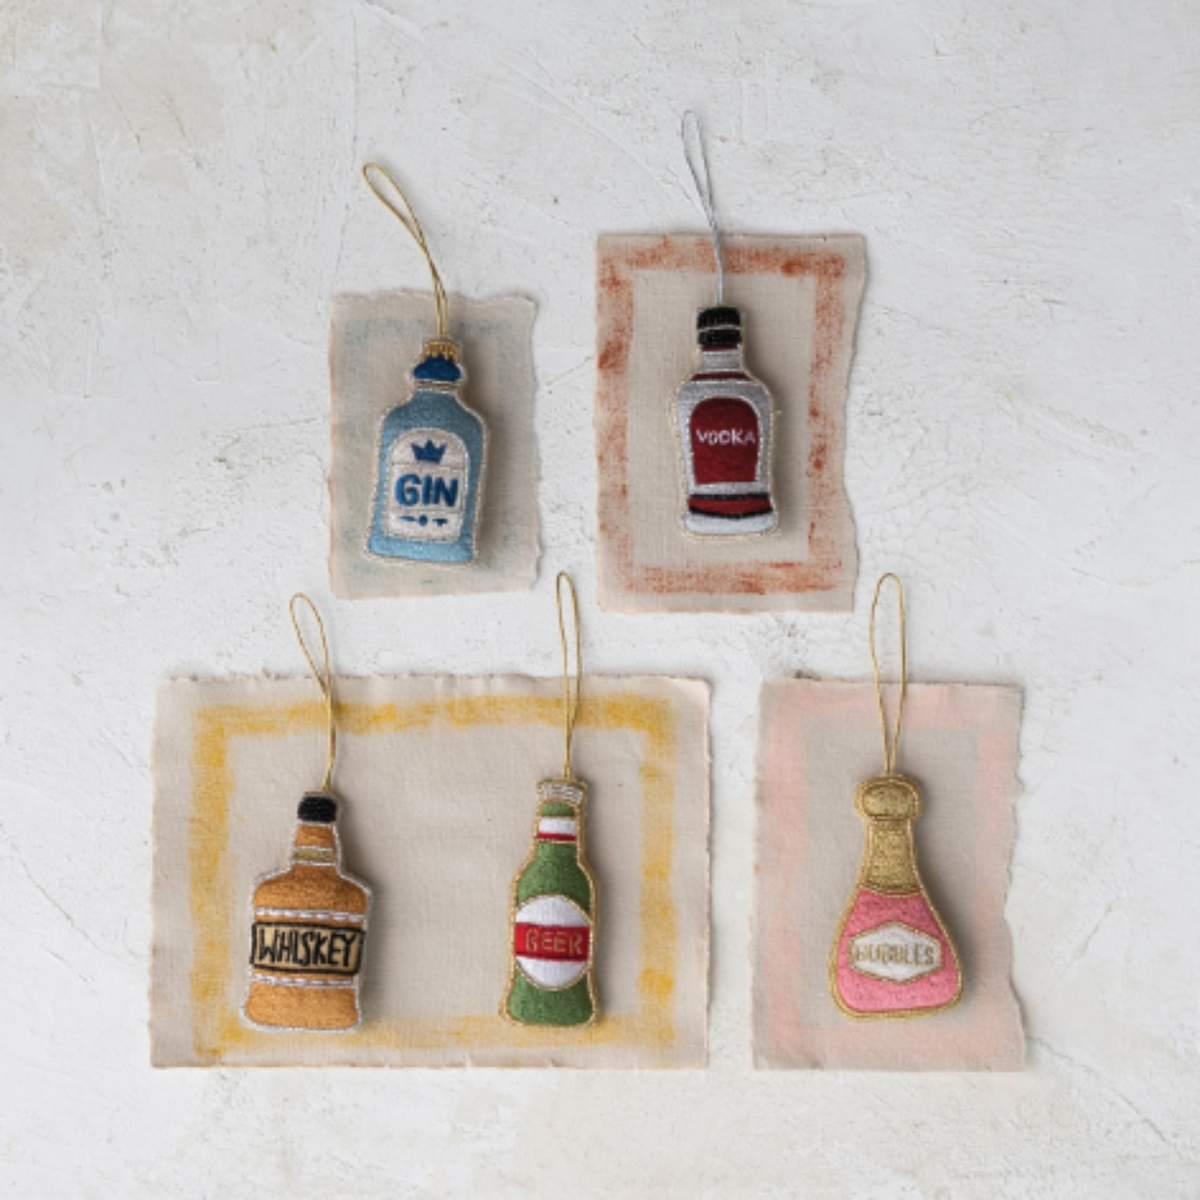 Fabric Whiskey Bottle Ornament w/ Embroidery &amp; Beads